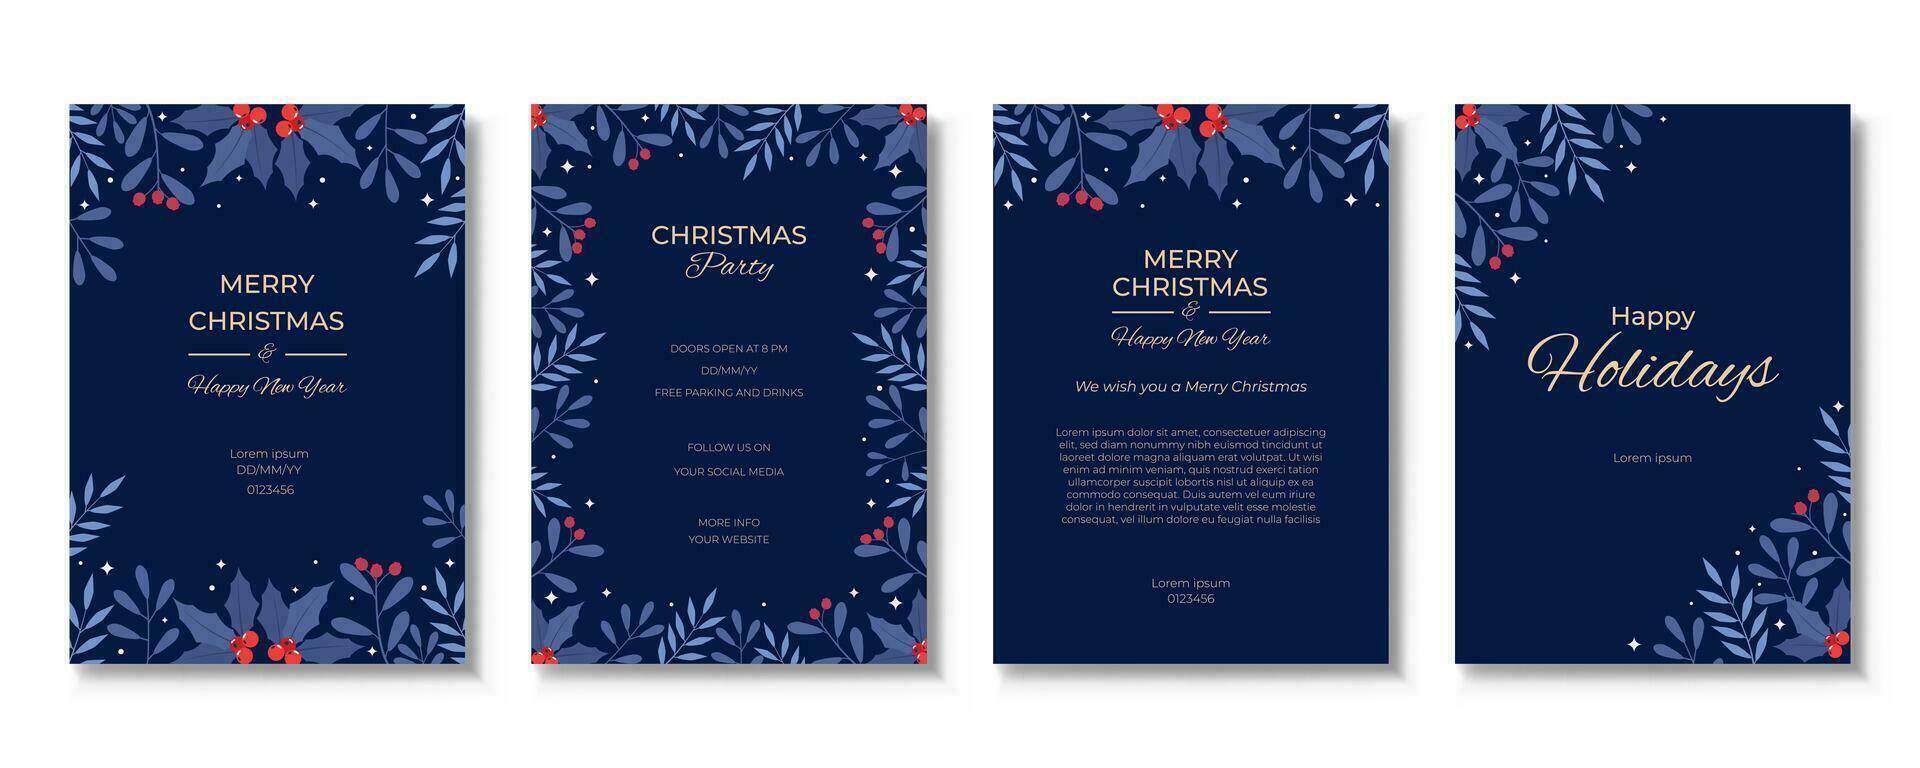 Merry Christmas and Happy New Year. Greeting card or poster template design with beautiful decoration vector